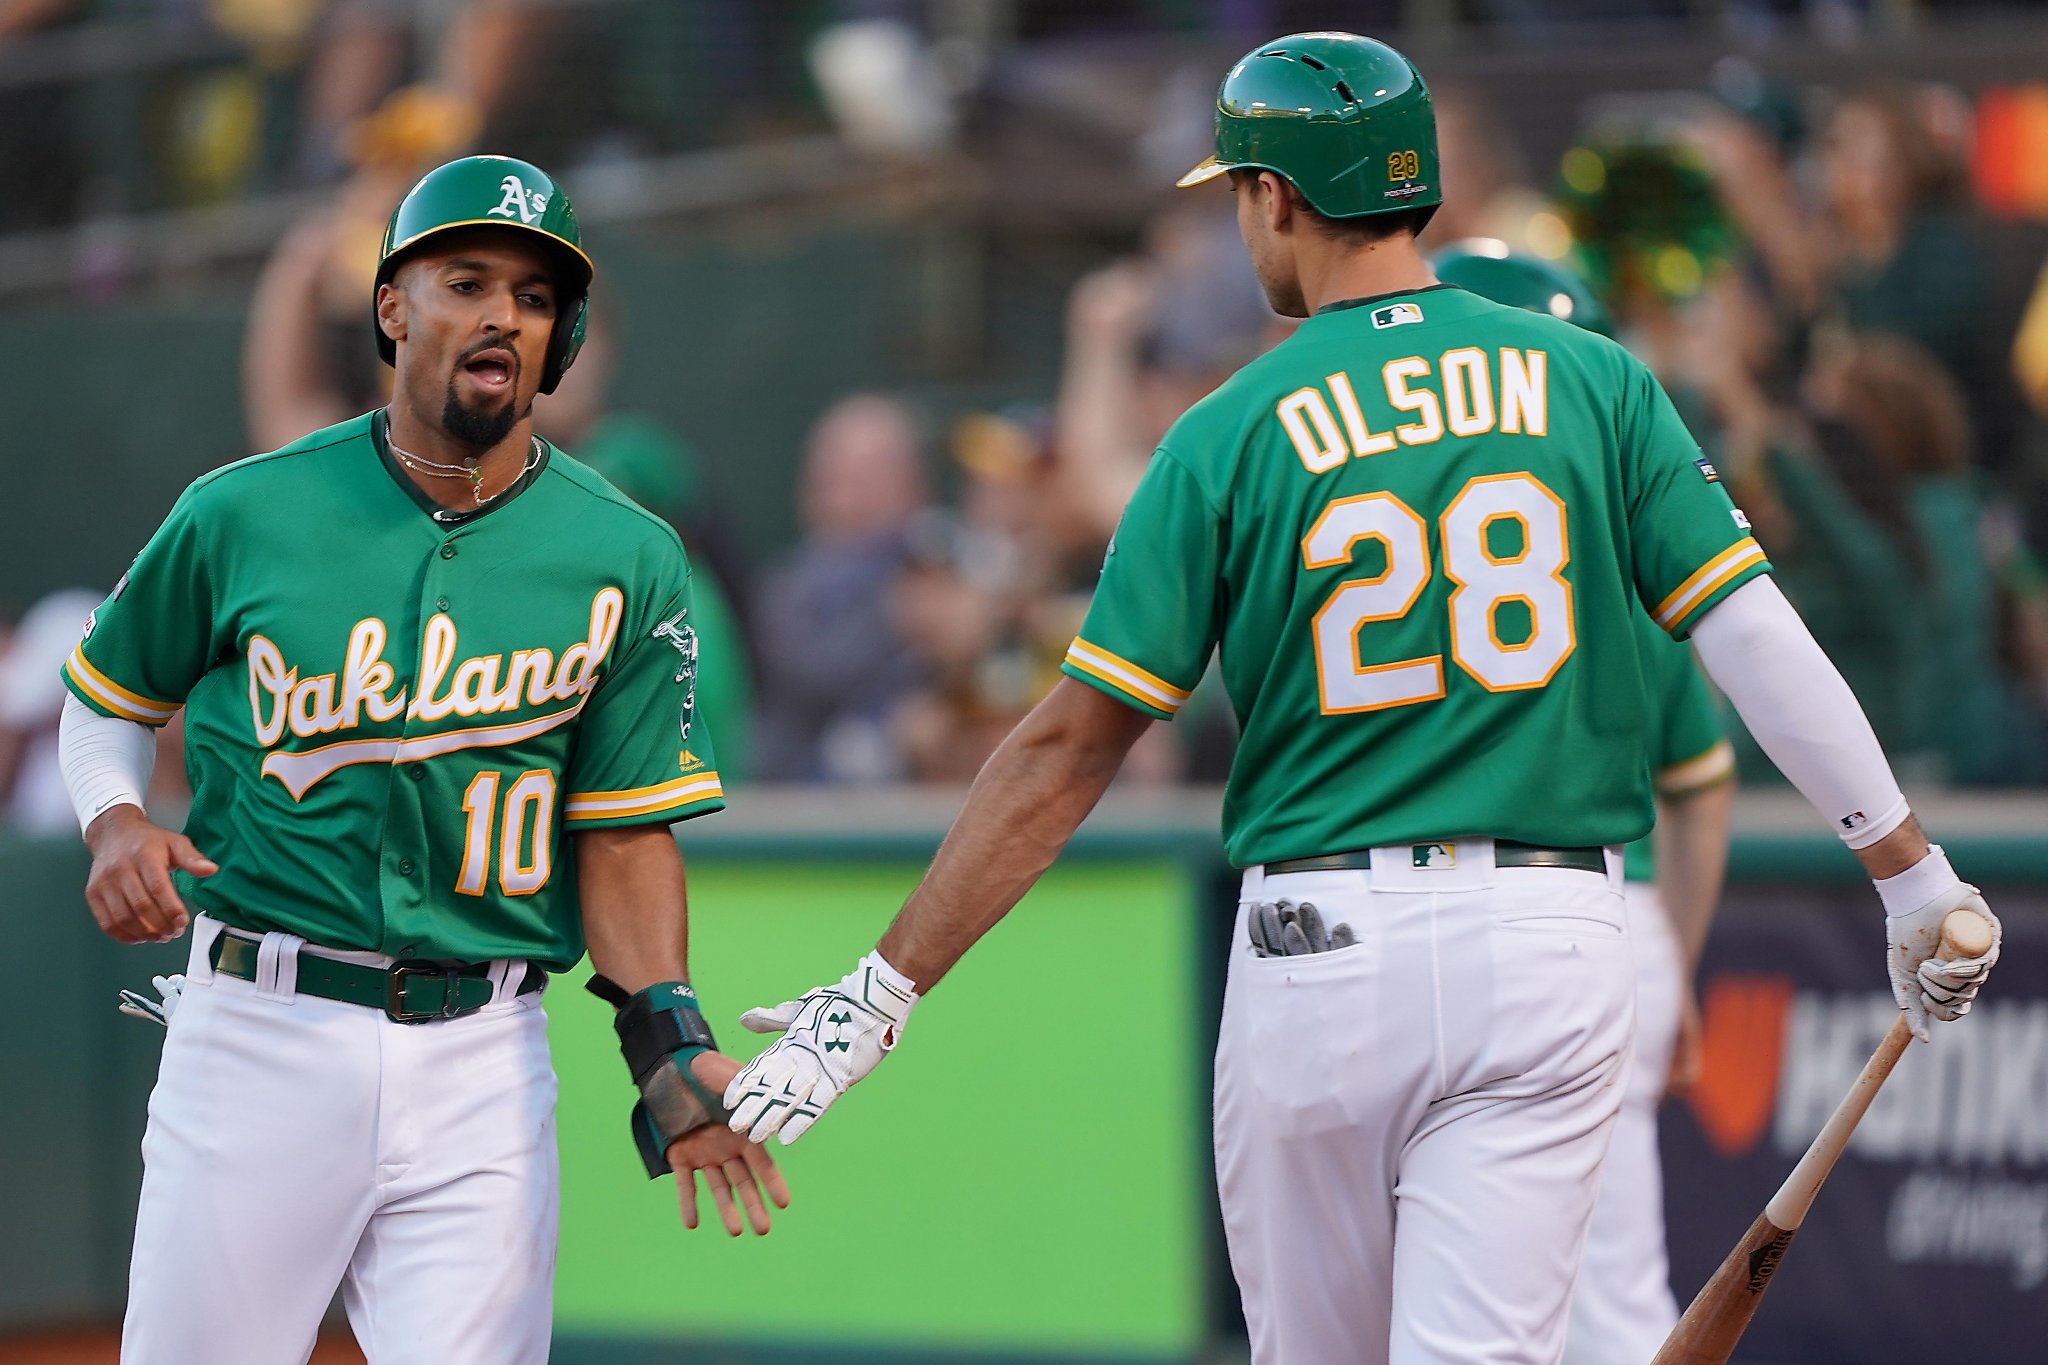 A's Semien third in MVP voting; Trout, Bellinger sweep awards for L.A.